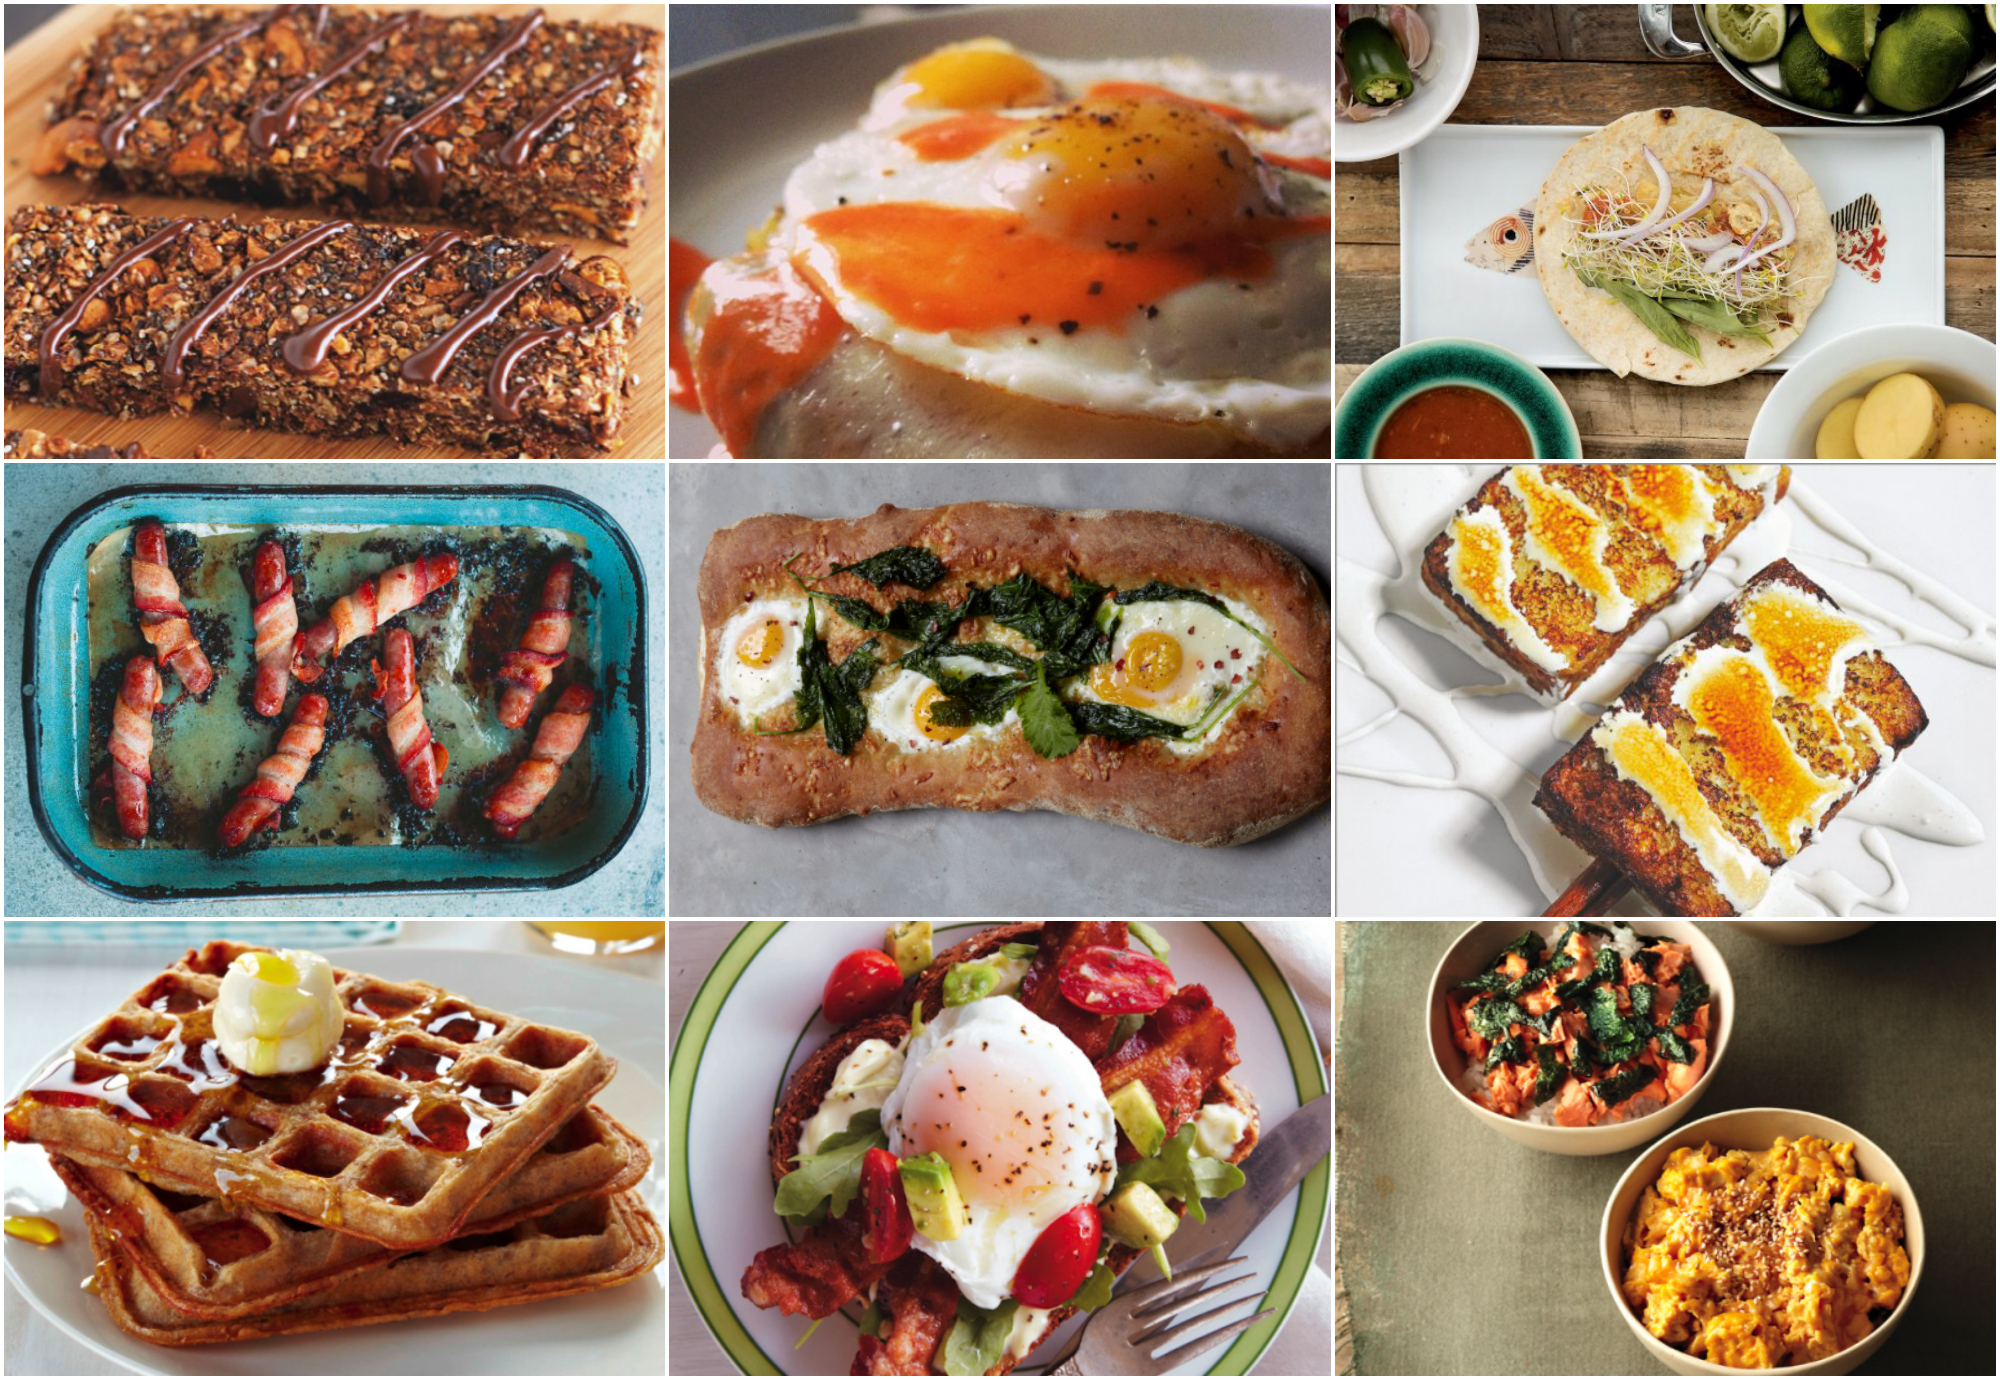 Our 25 Most Popular Brunch Recipes Of 2013 - Food Republic